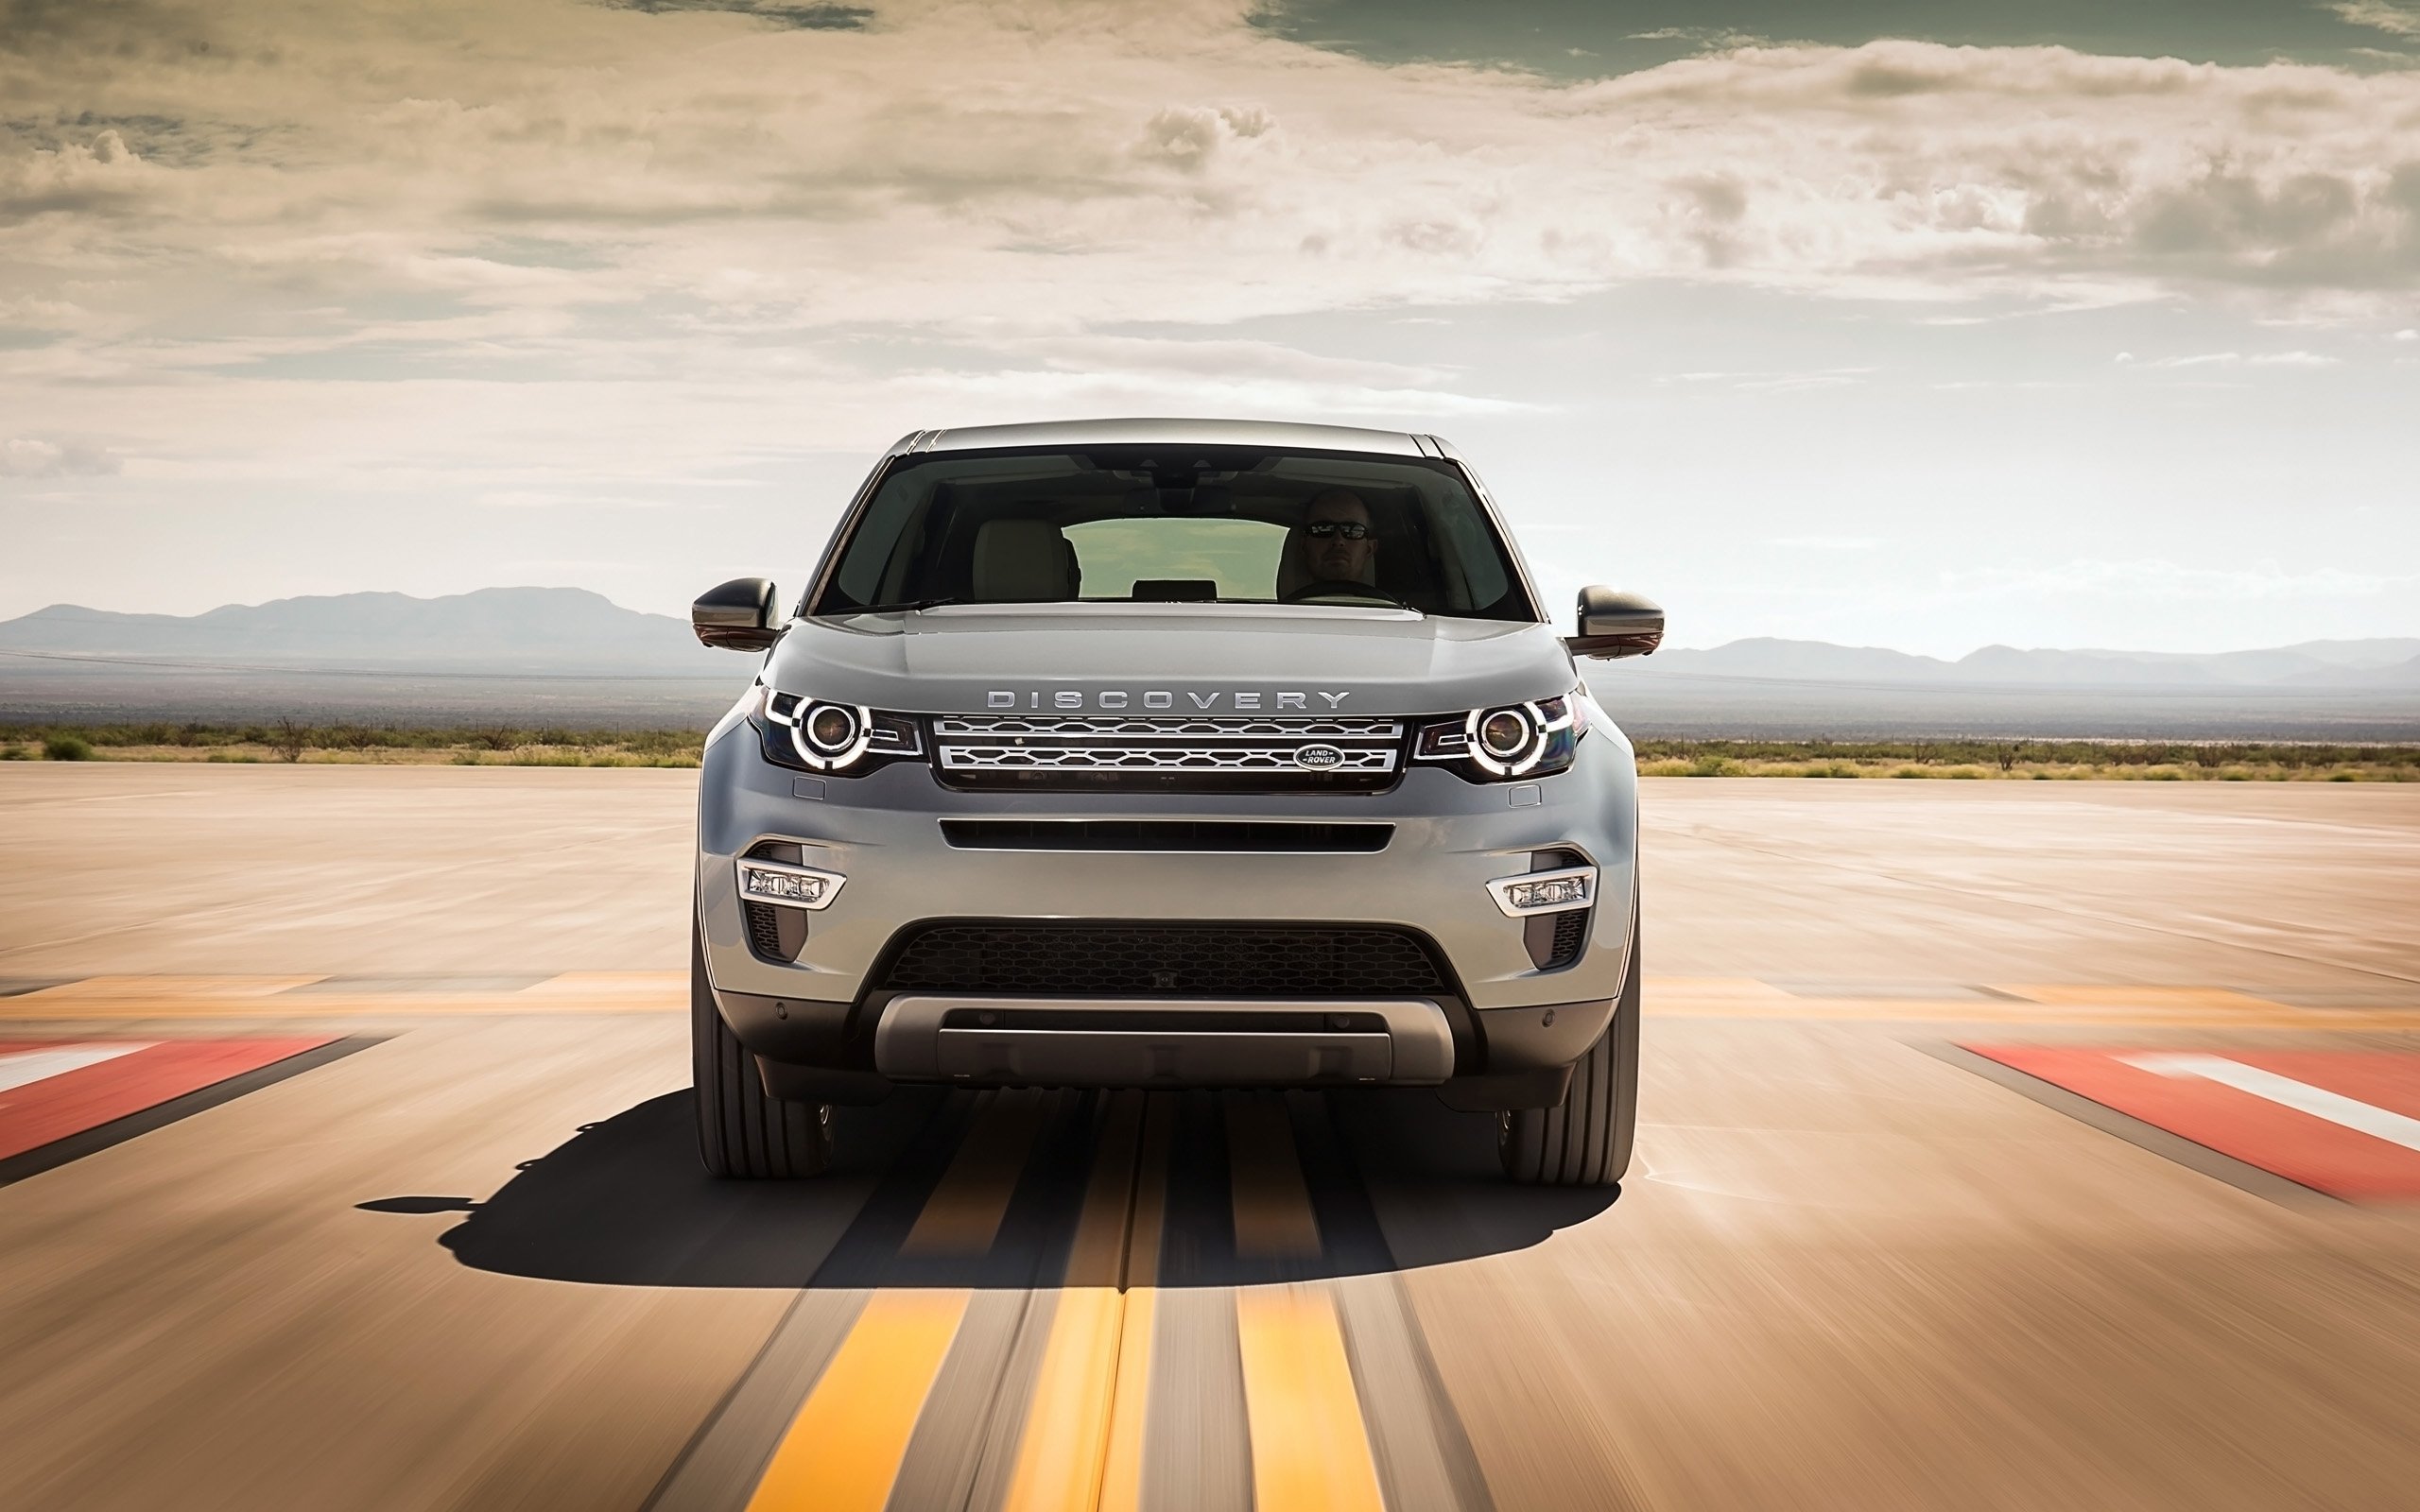 2015 Land Rover Discovery Sport Spaceport Front wallpapers 2015 2560x1600